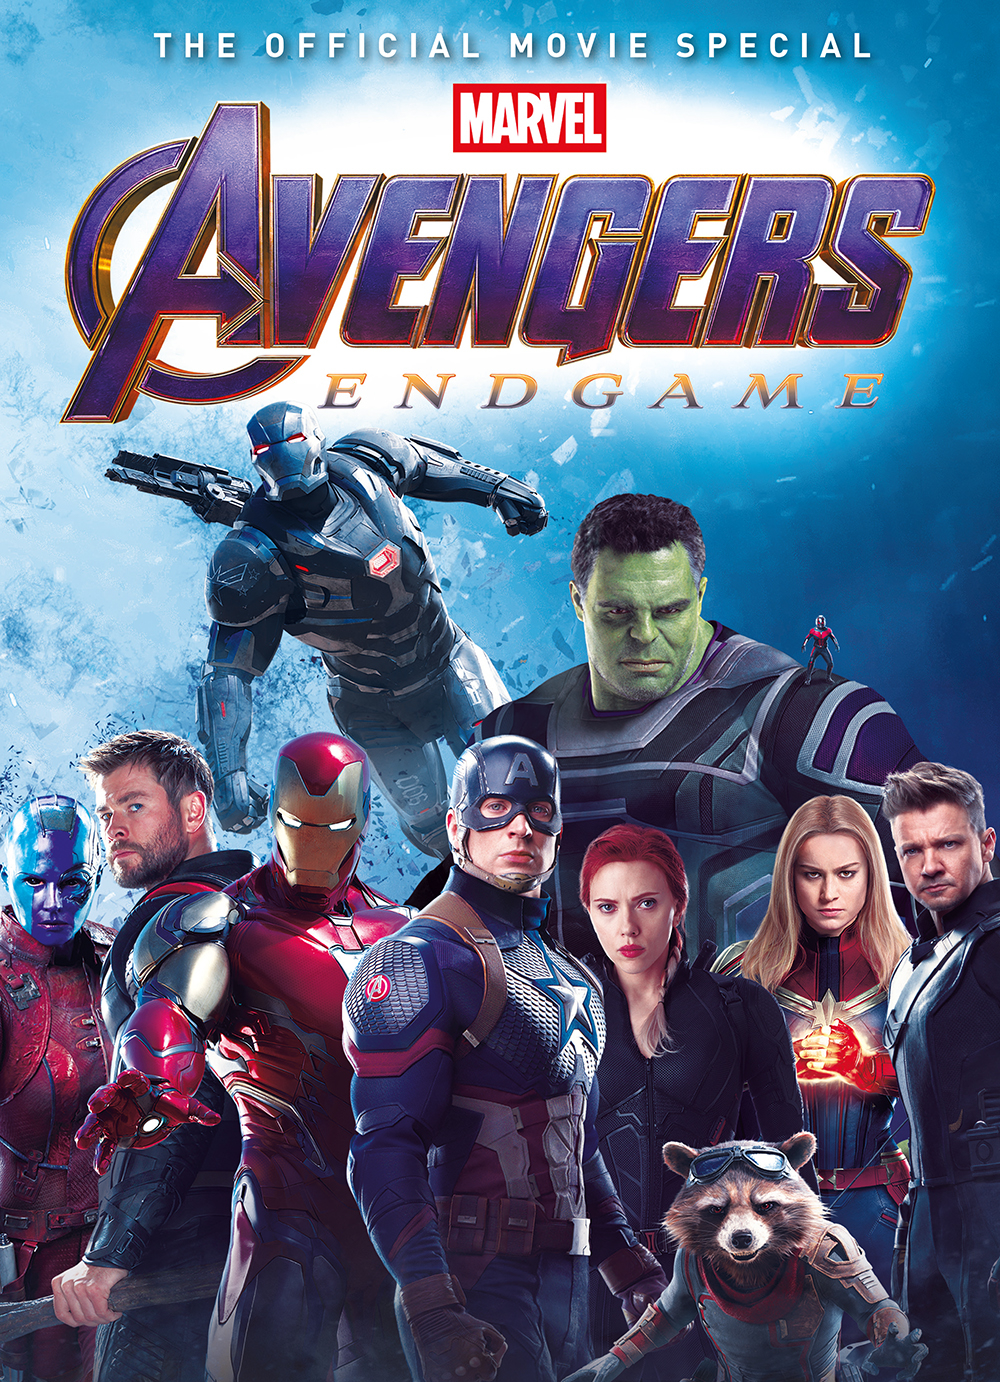 Avengers: Endgame - The Official Movie Special (Hardcover) 